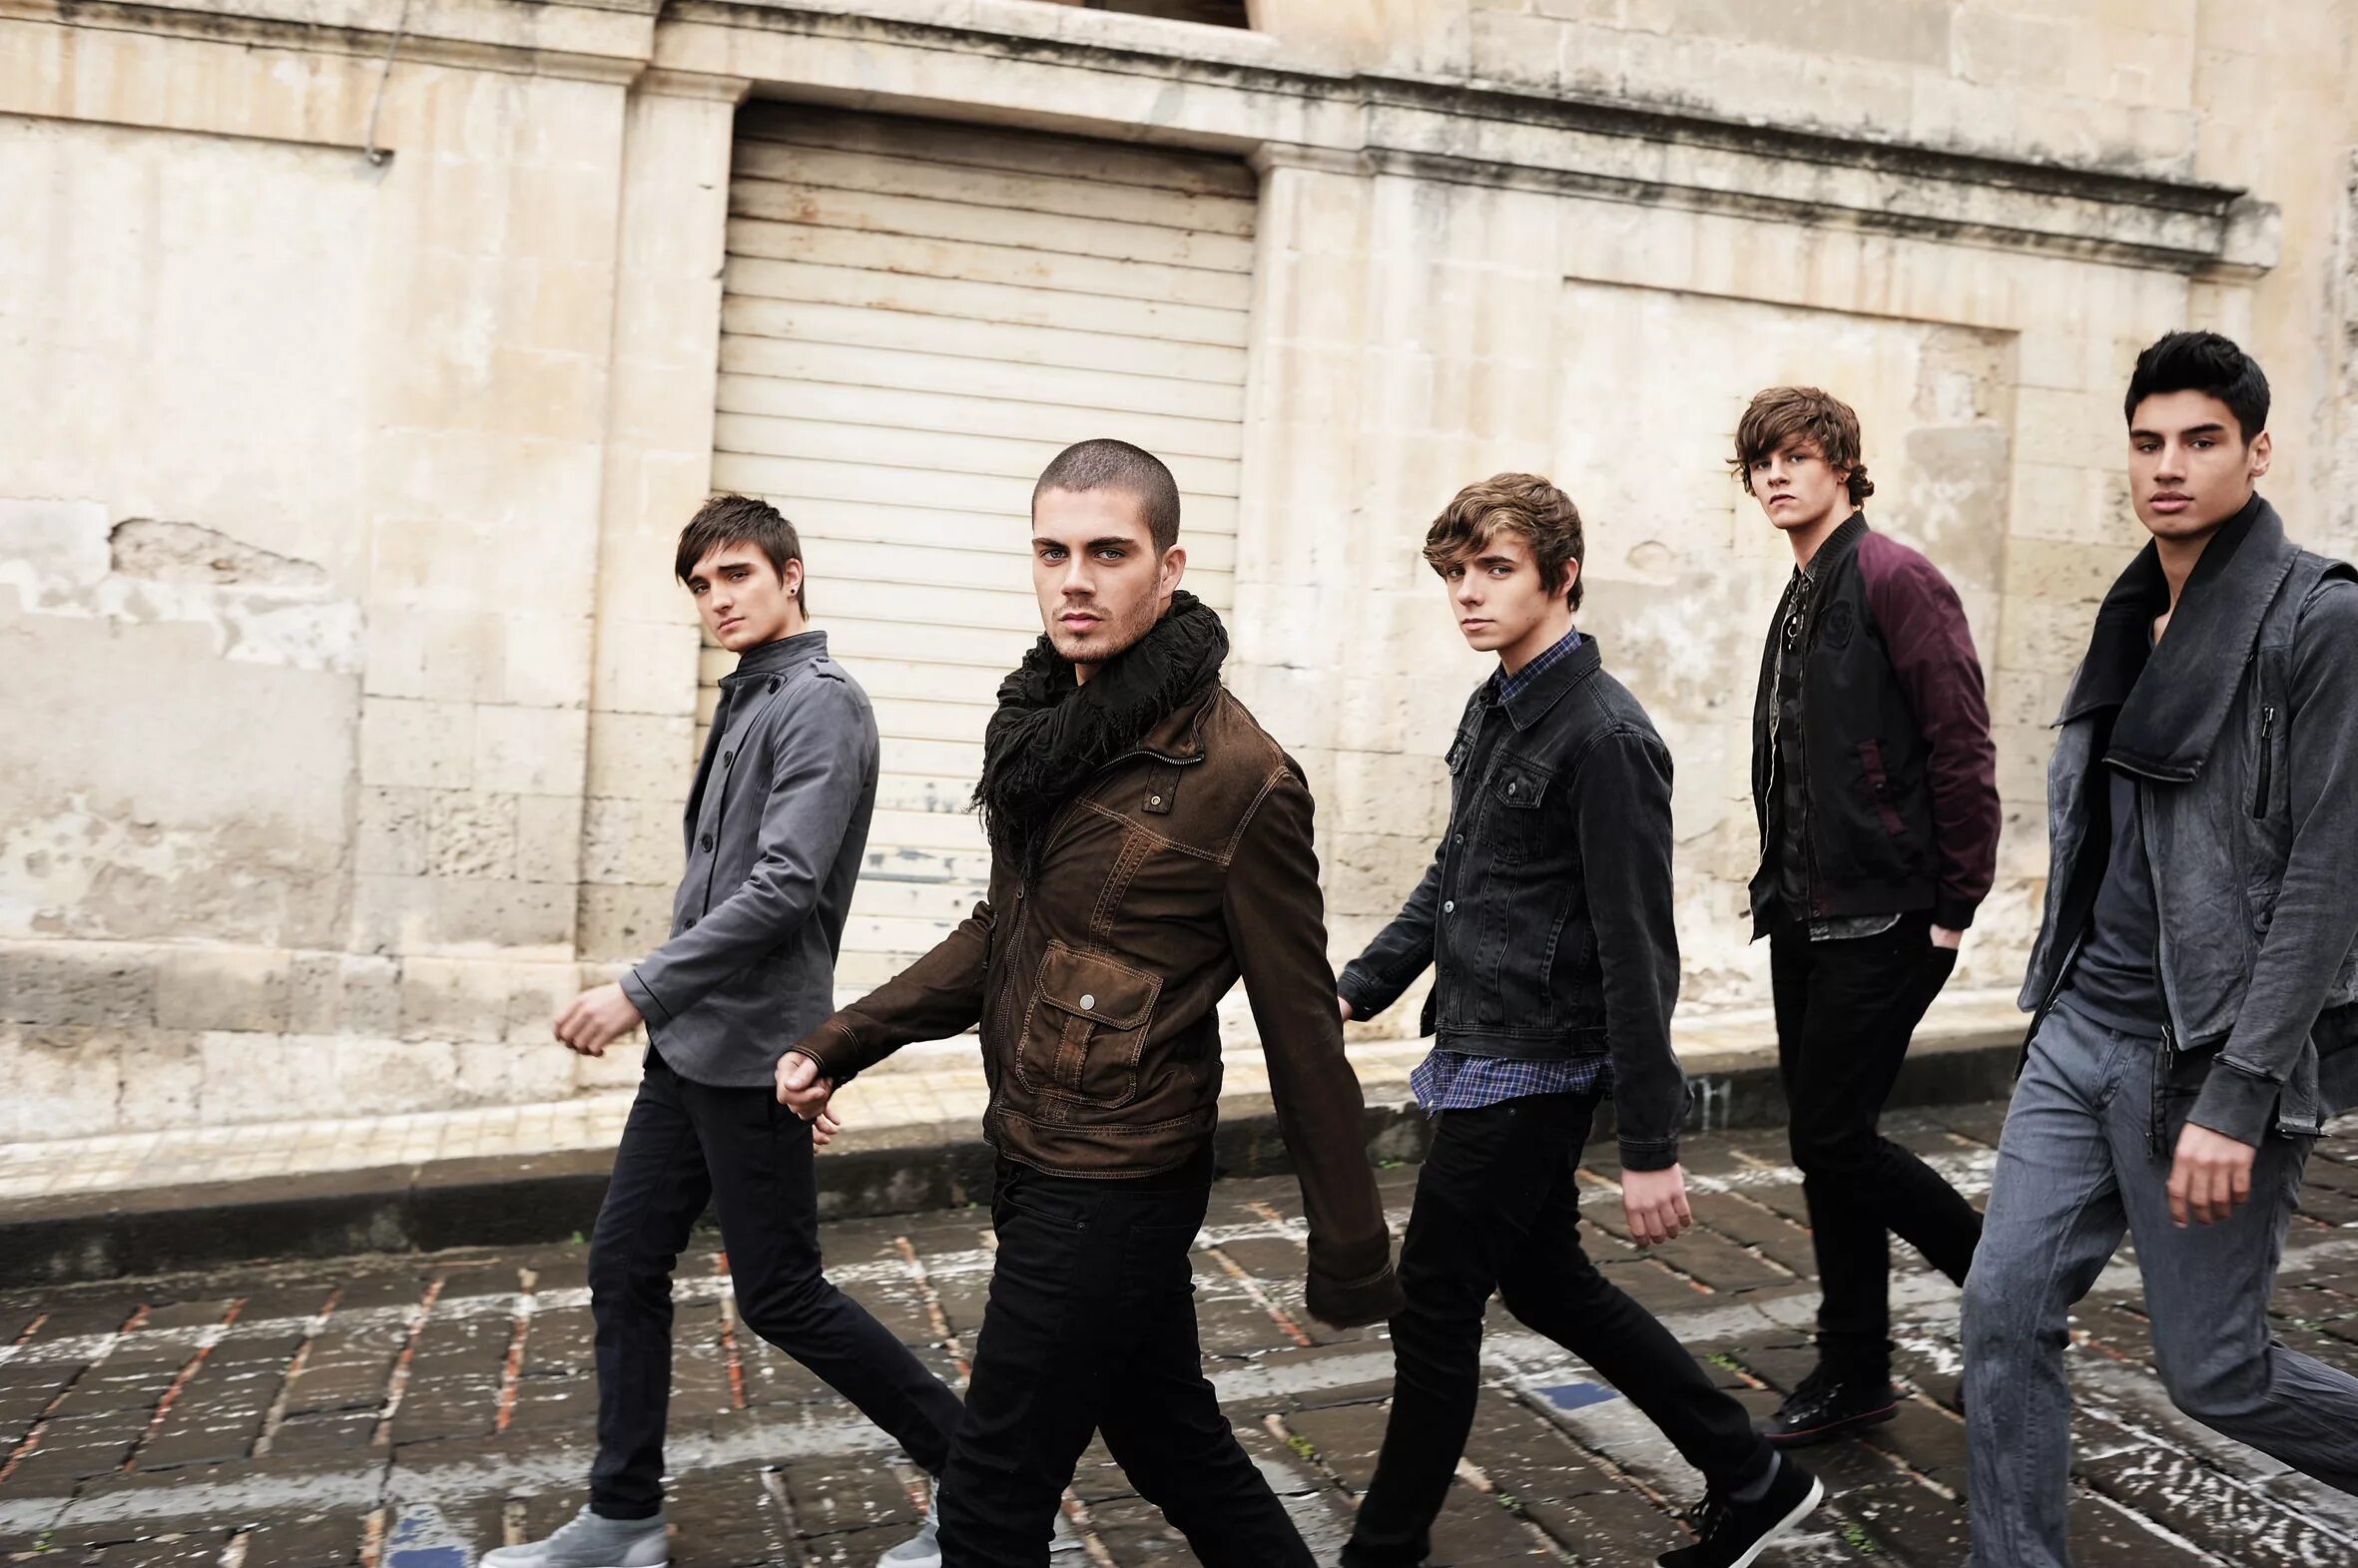 Группа the wanted. Want. Wanted 2022. The wanted 2022 фотосессия.